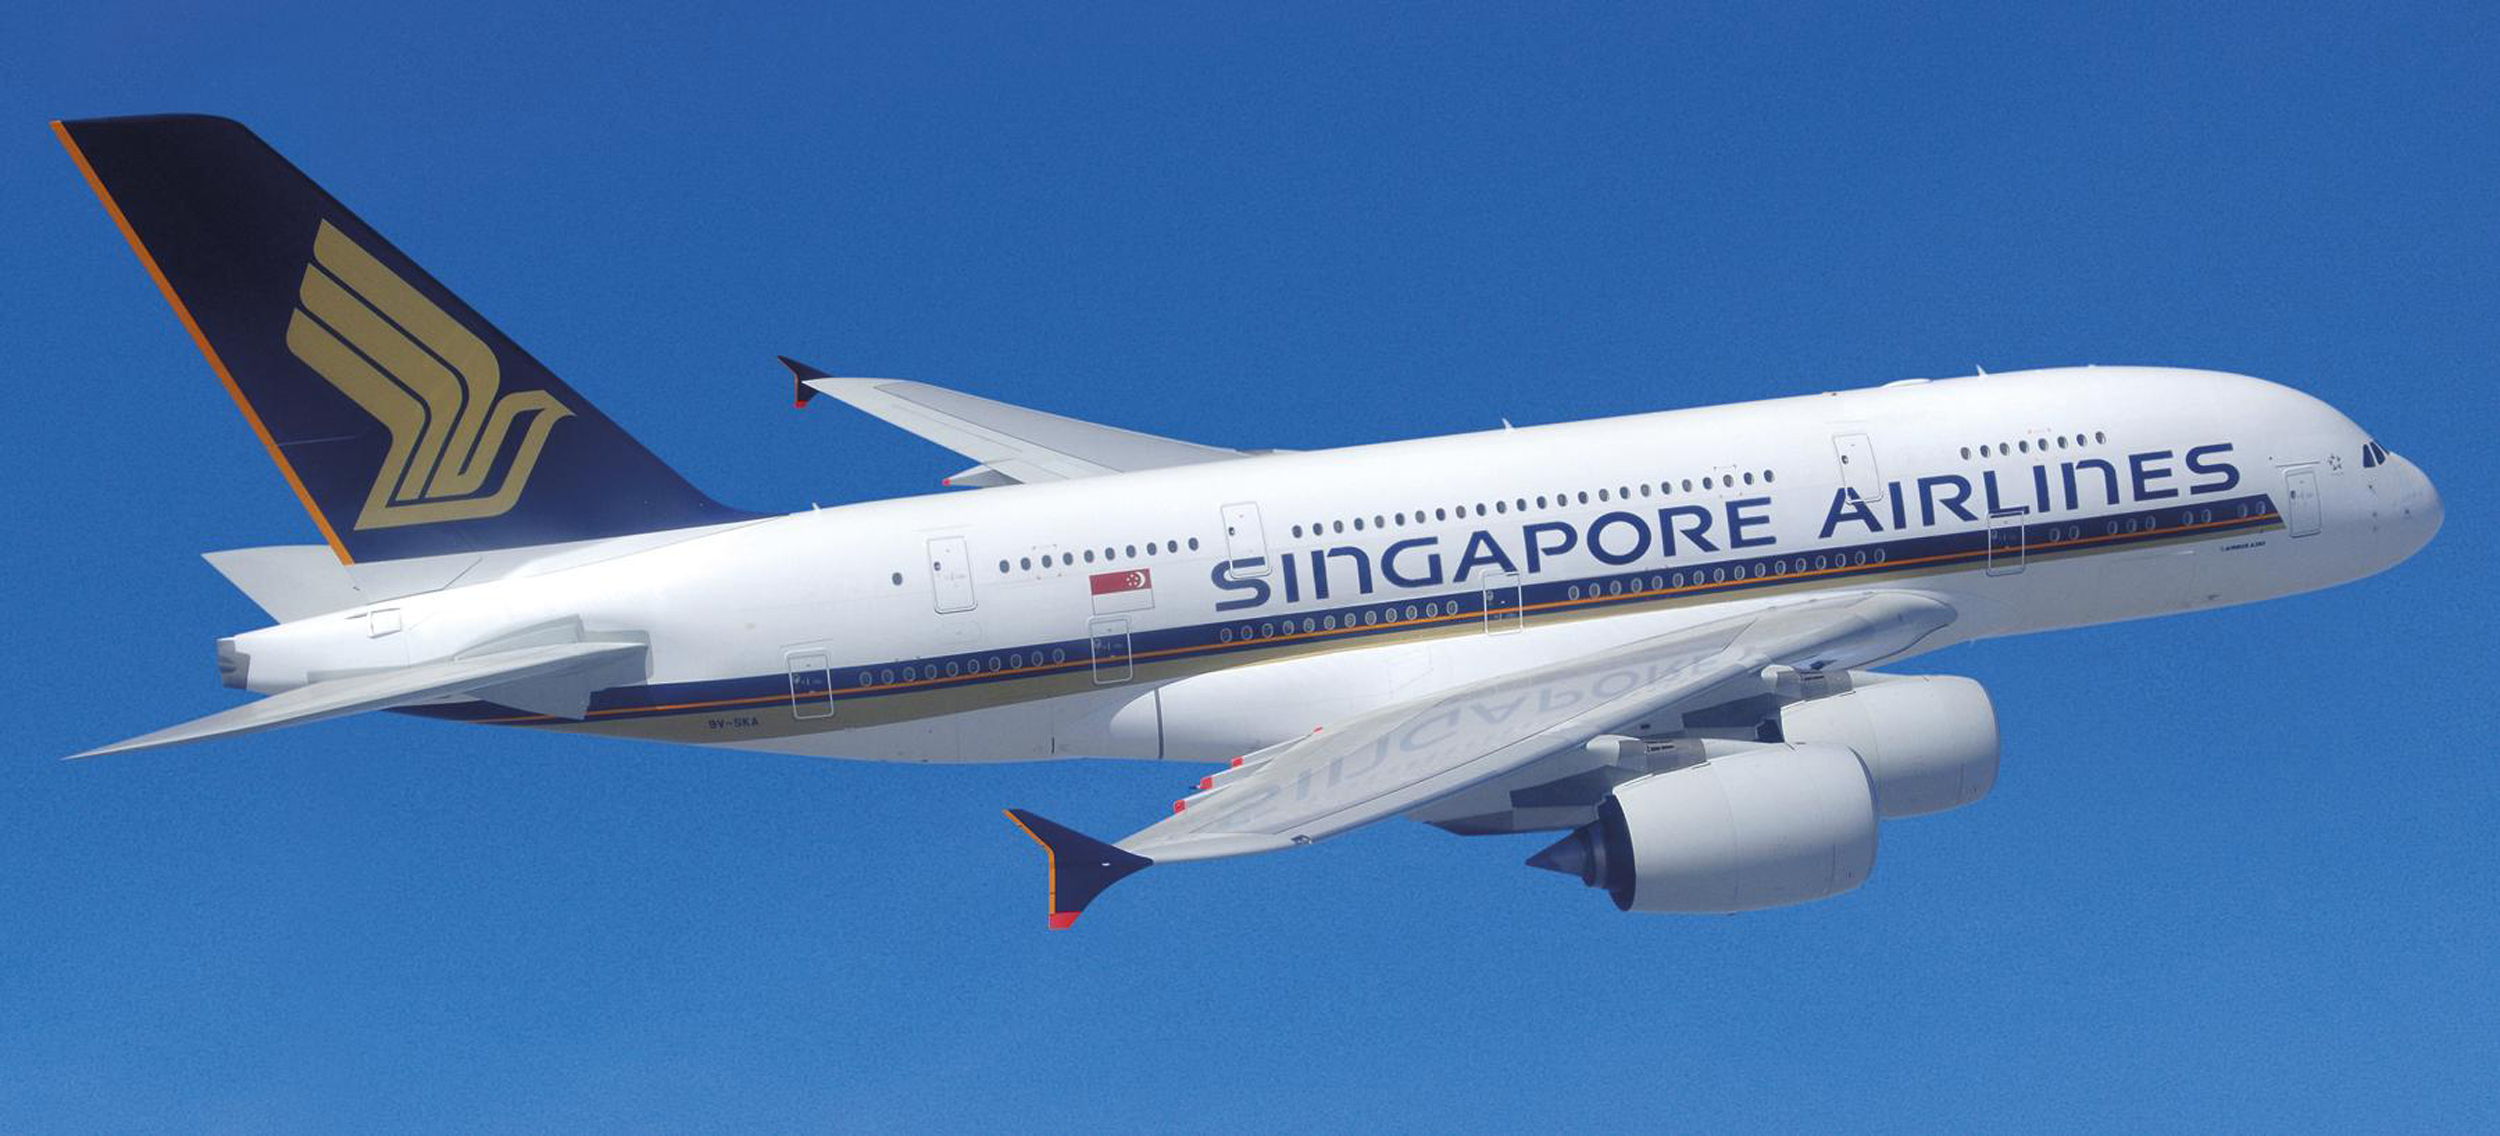 SINGAPORE AIRLINEs: Always the Best! | Musas Traveling in Asia